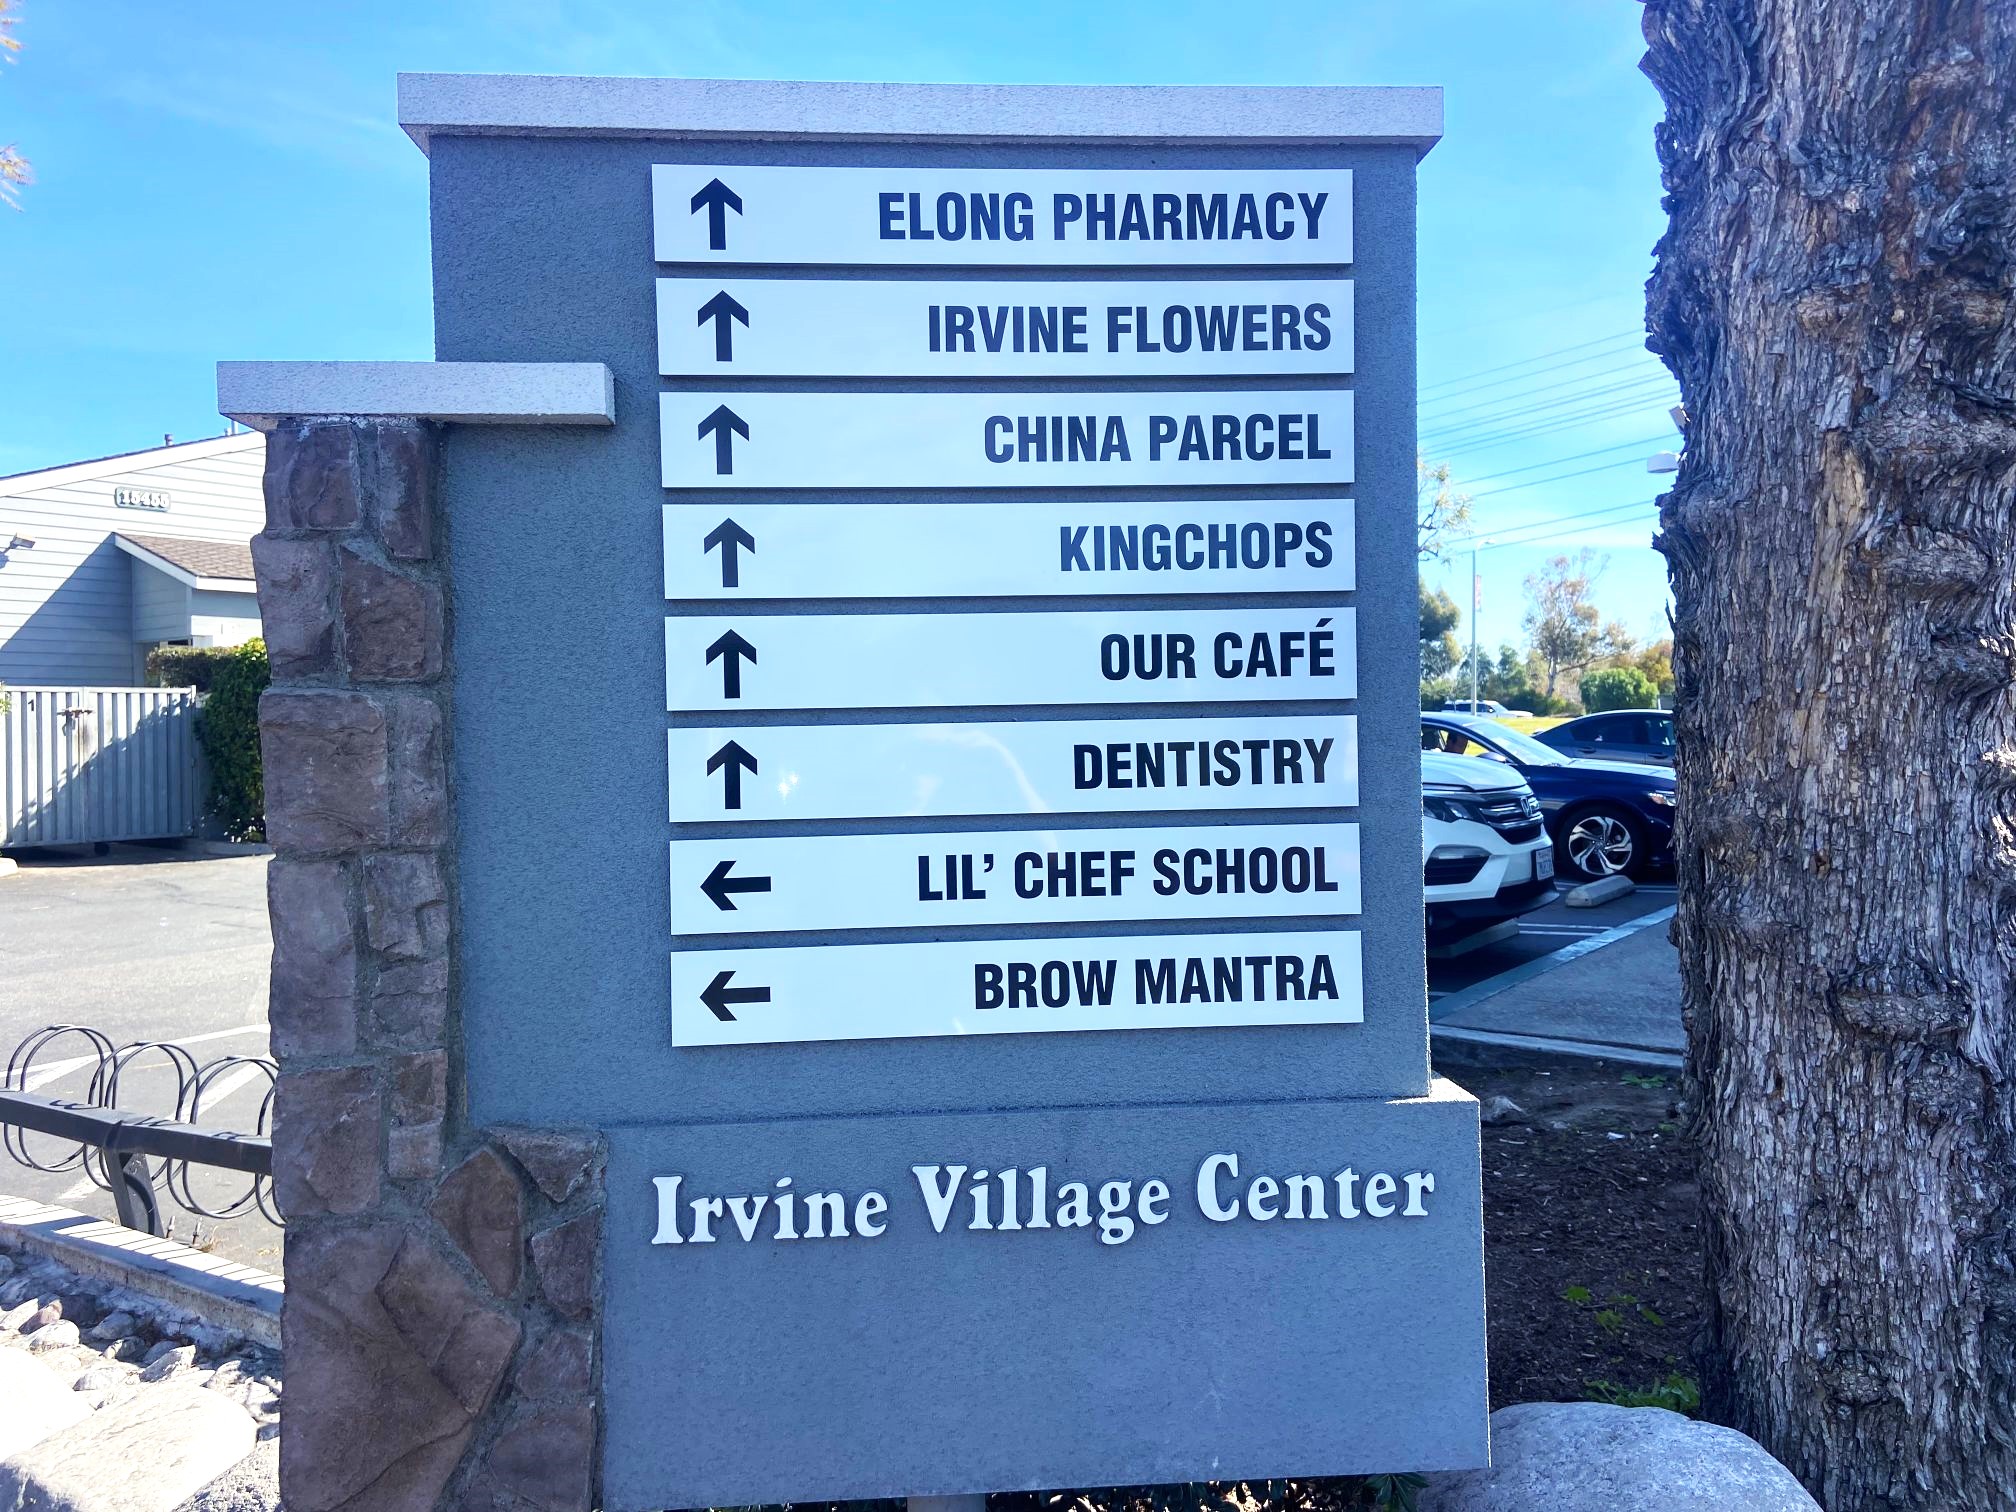 Property Management Companies in Irvine Need a Great Sign Company Partner for Wayfinding Signs and Tenant Changes!